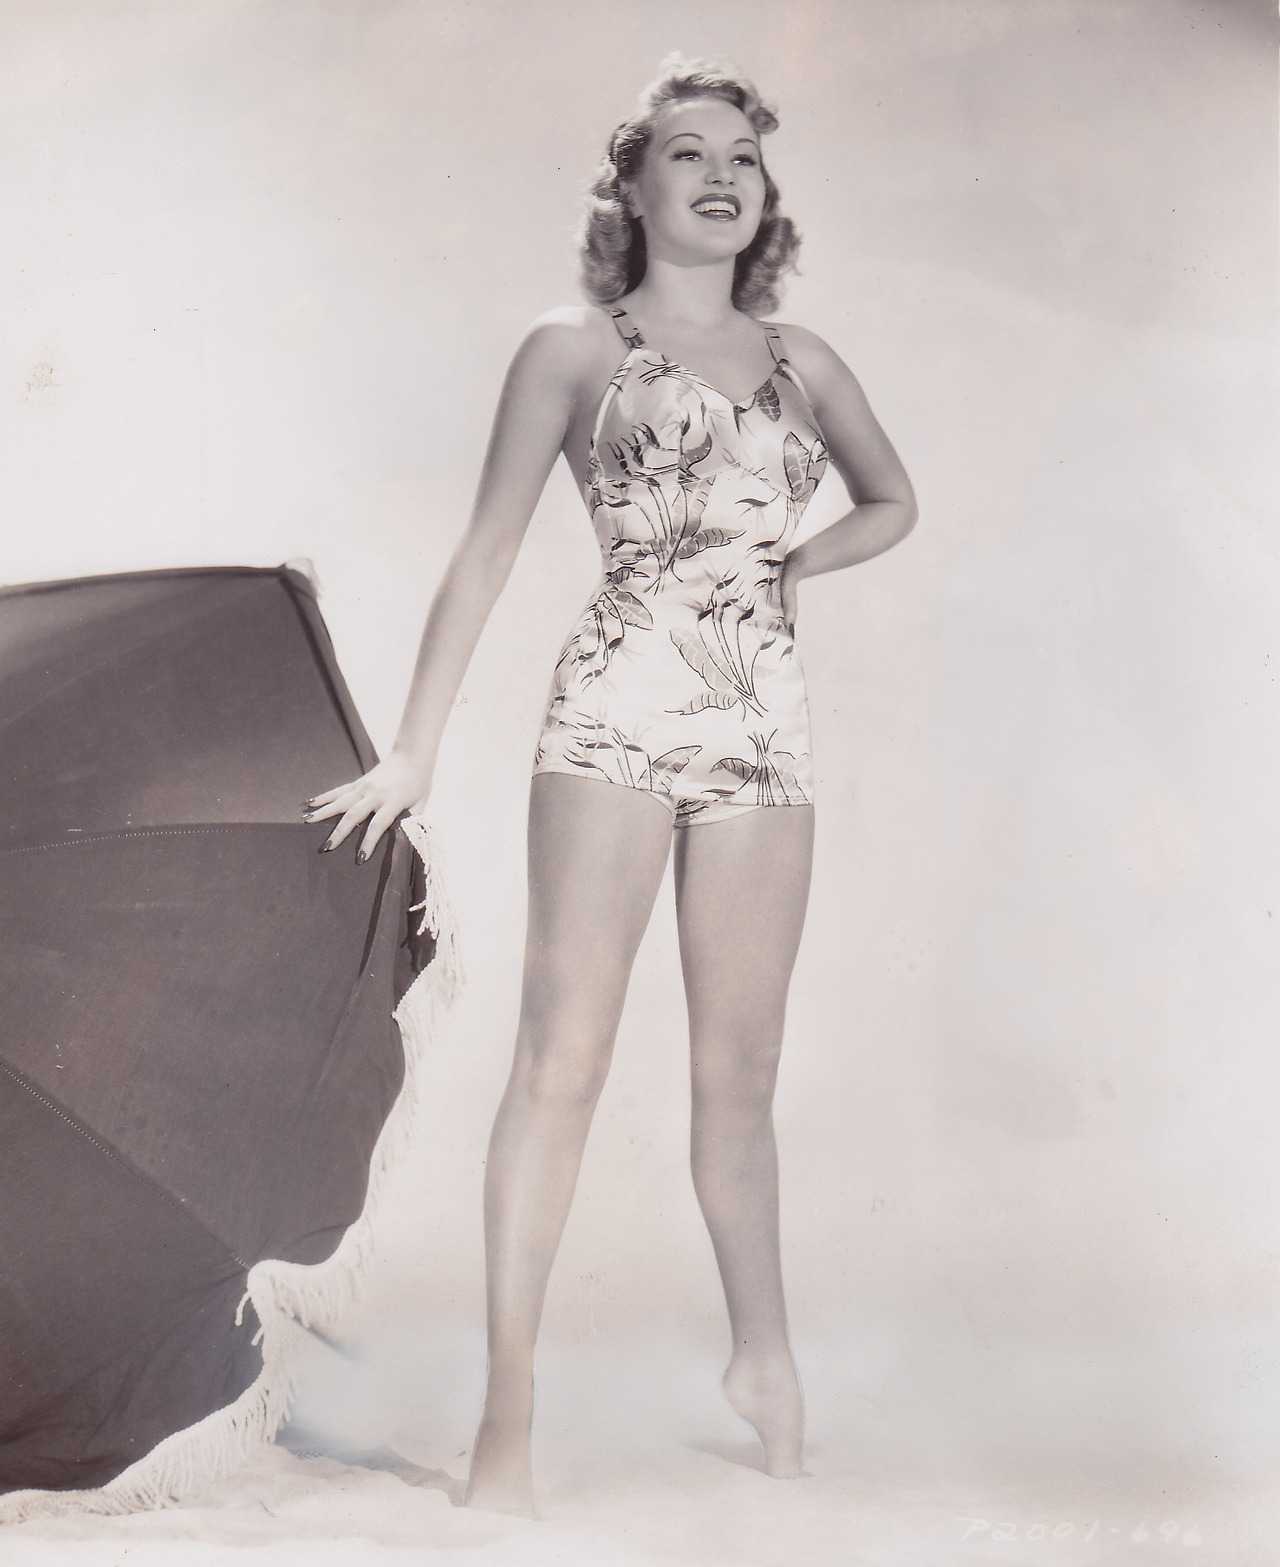 51 Hottest Betty Grable Bikini pictures Are An Embodiment Of Greatness 107